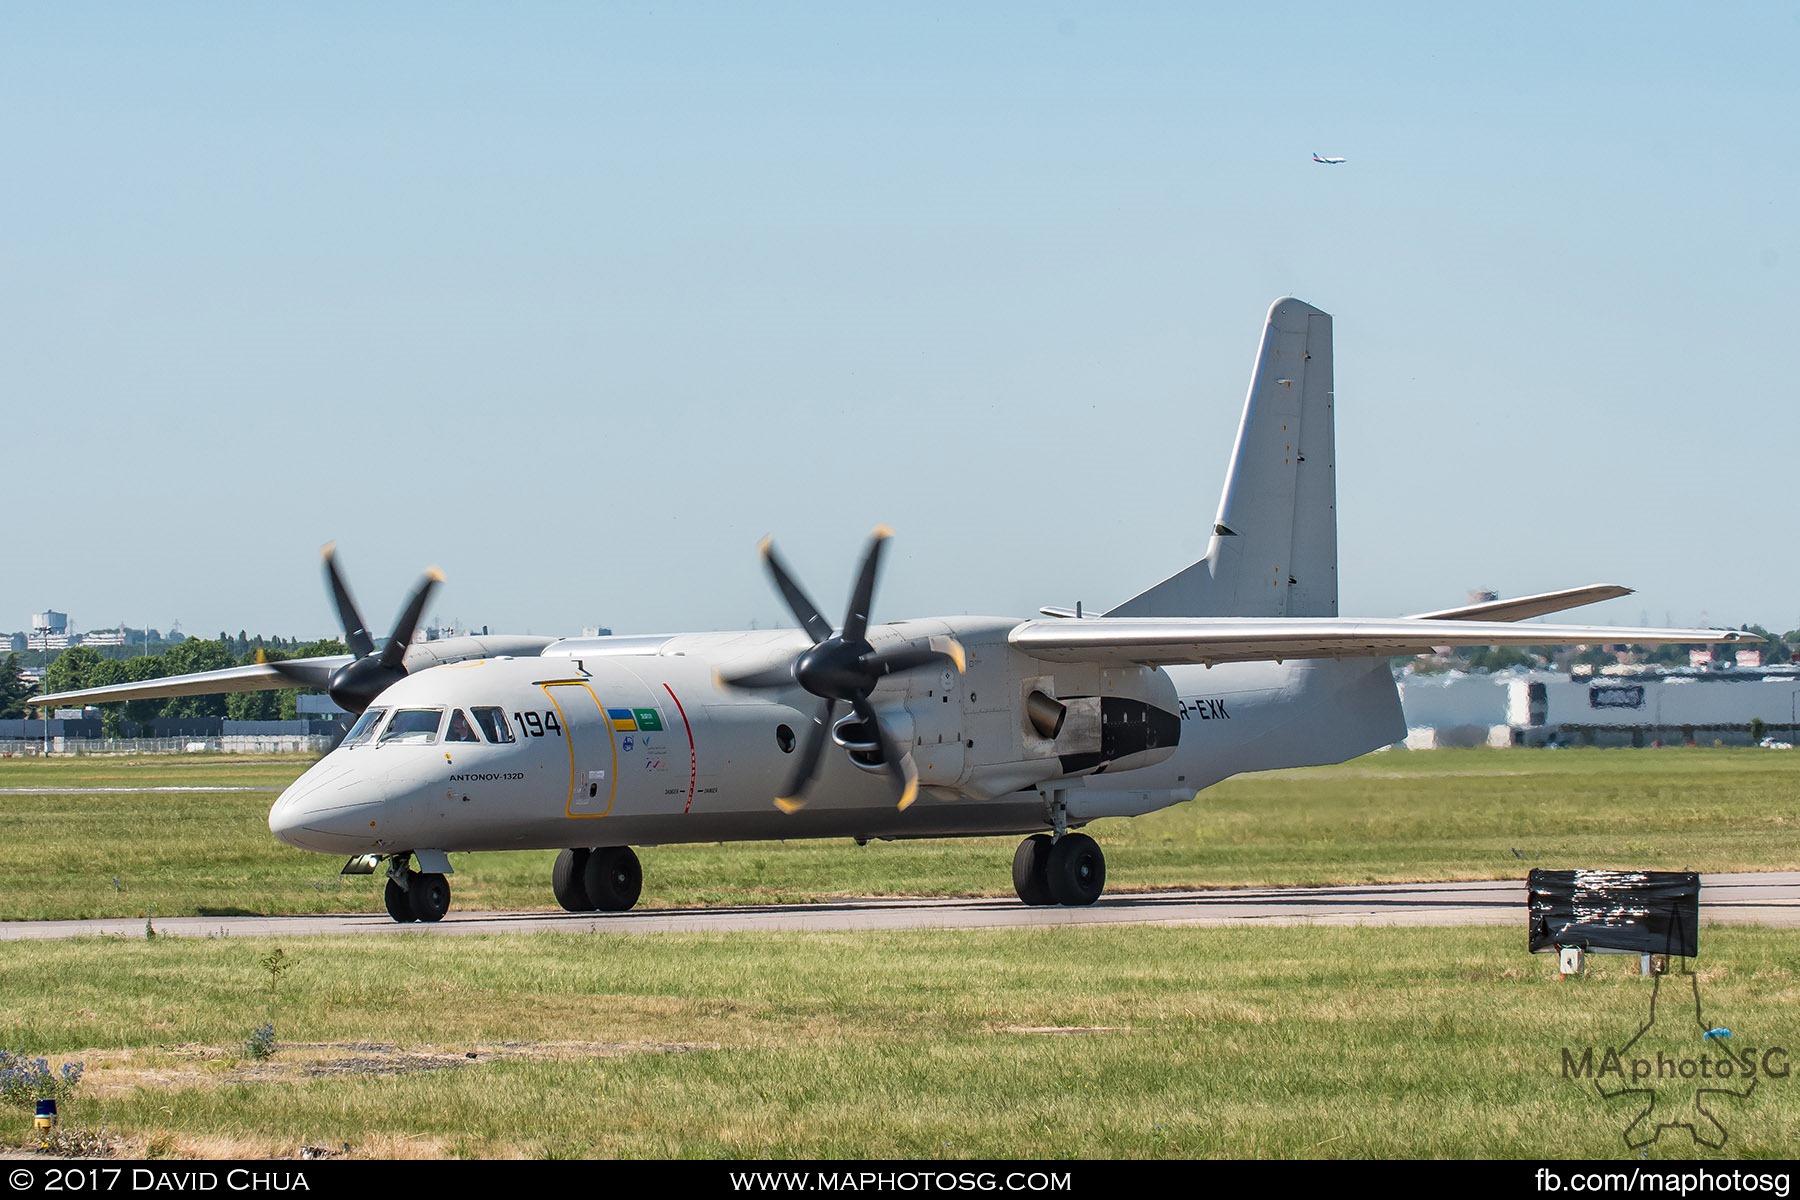 32. Coming from a corporation between Ukraine and Saudi Arabia, the Antonov AN-132D make its way to the runway for it’s aerial display segment. The An-132D is similar in size to the C-27J and C-295W. It is capable of carrying a maximum payload of 9.2 tons.